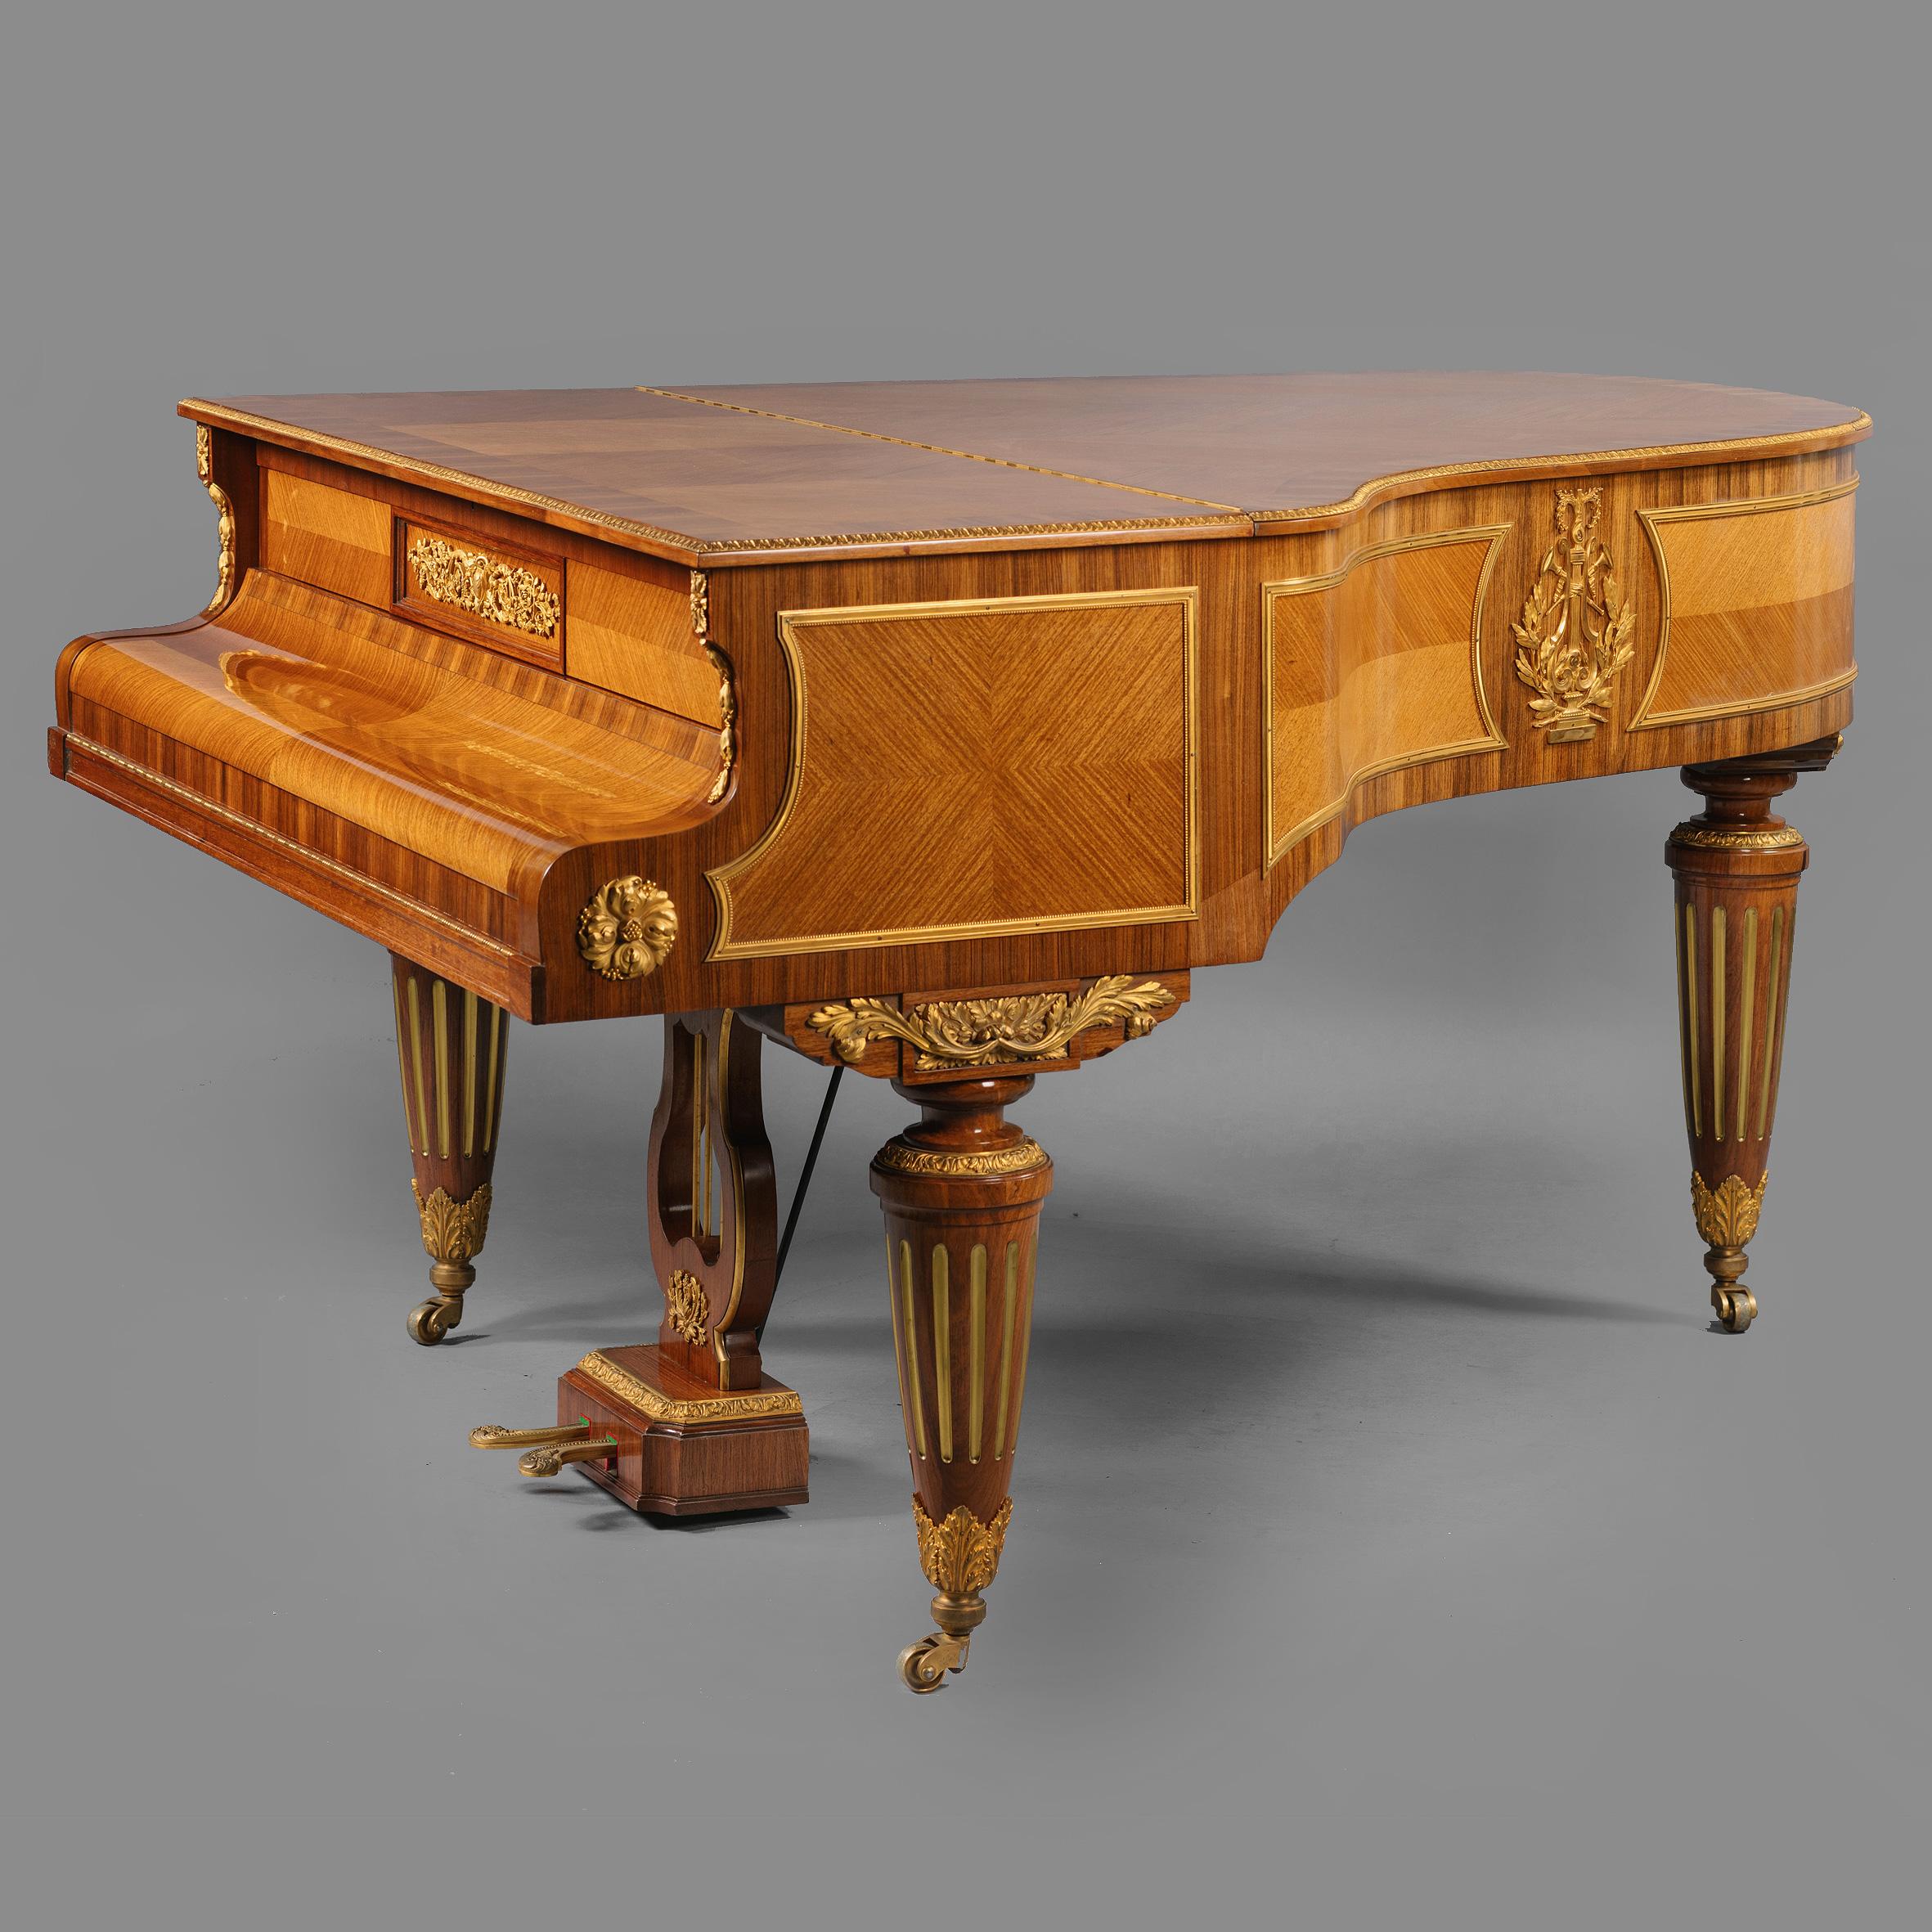 A fine Louis XVI style gilt-bronze mounted baby grand Piano by Gaveau à Paris. 

Serial number 67874.

This fine baby grand piano has a quarter-veneered top with a stiff leaf cast border above serpentine shaped frieze panels, centred to each